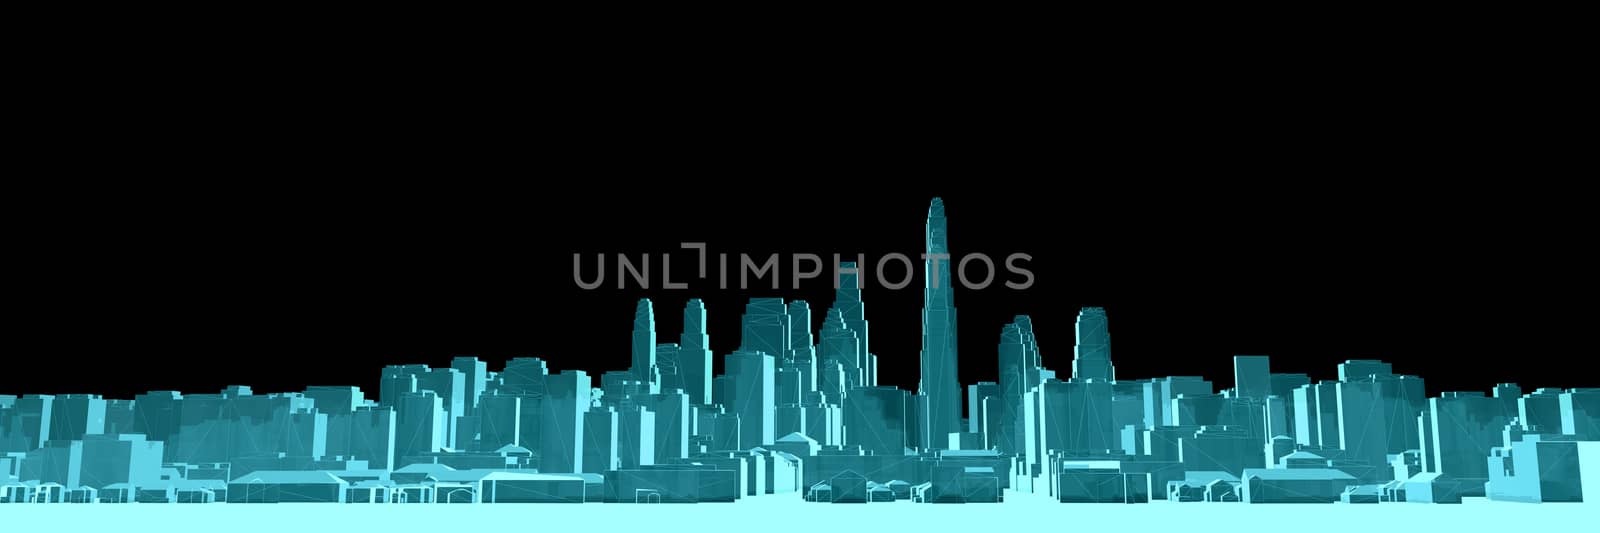 X-Ray Image Of Modern City on Black. 3D rendering